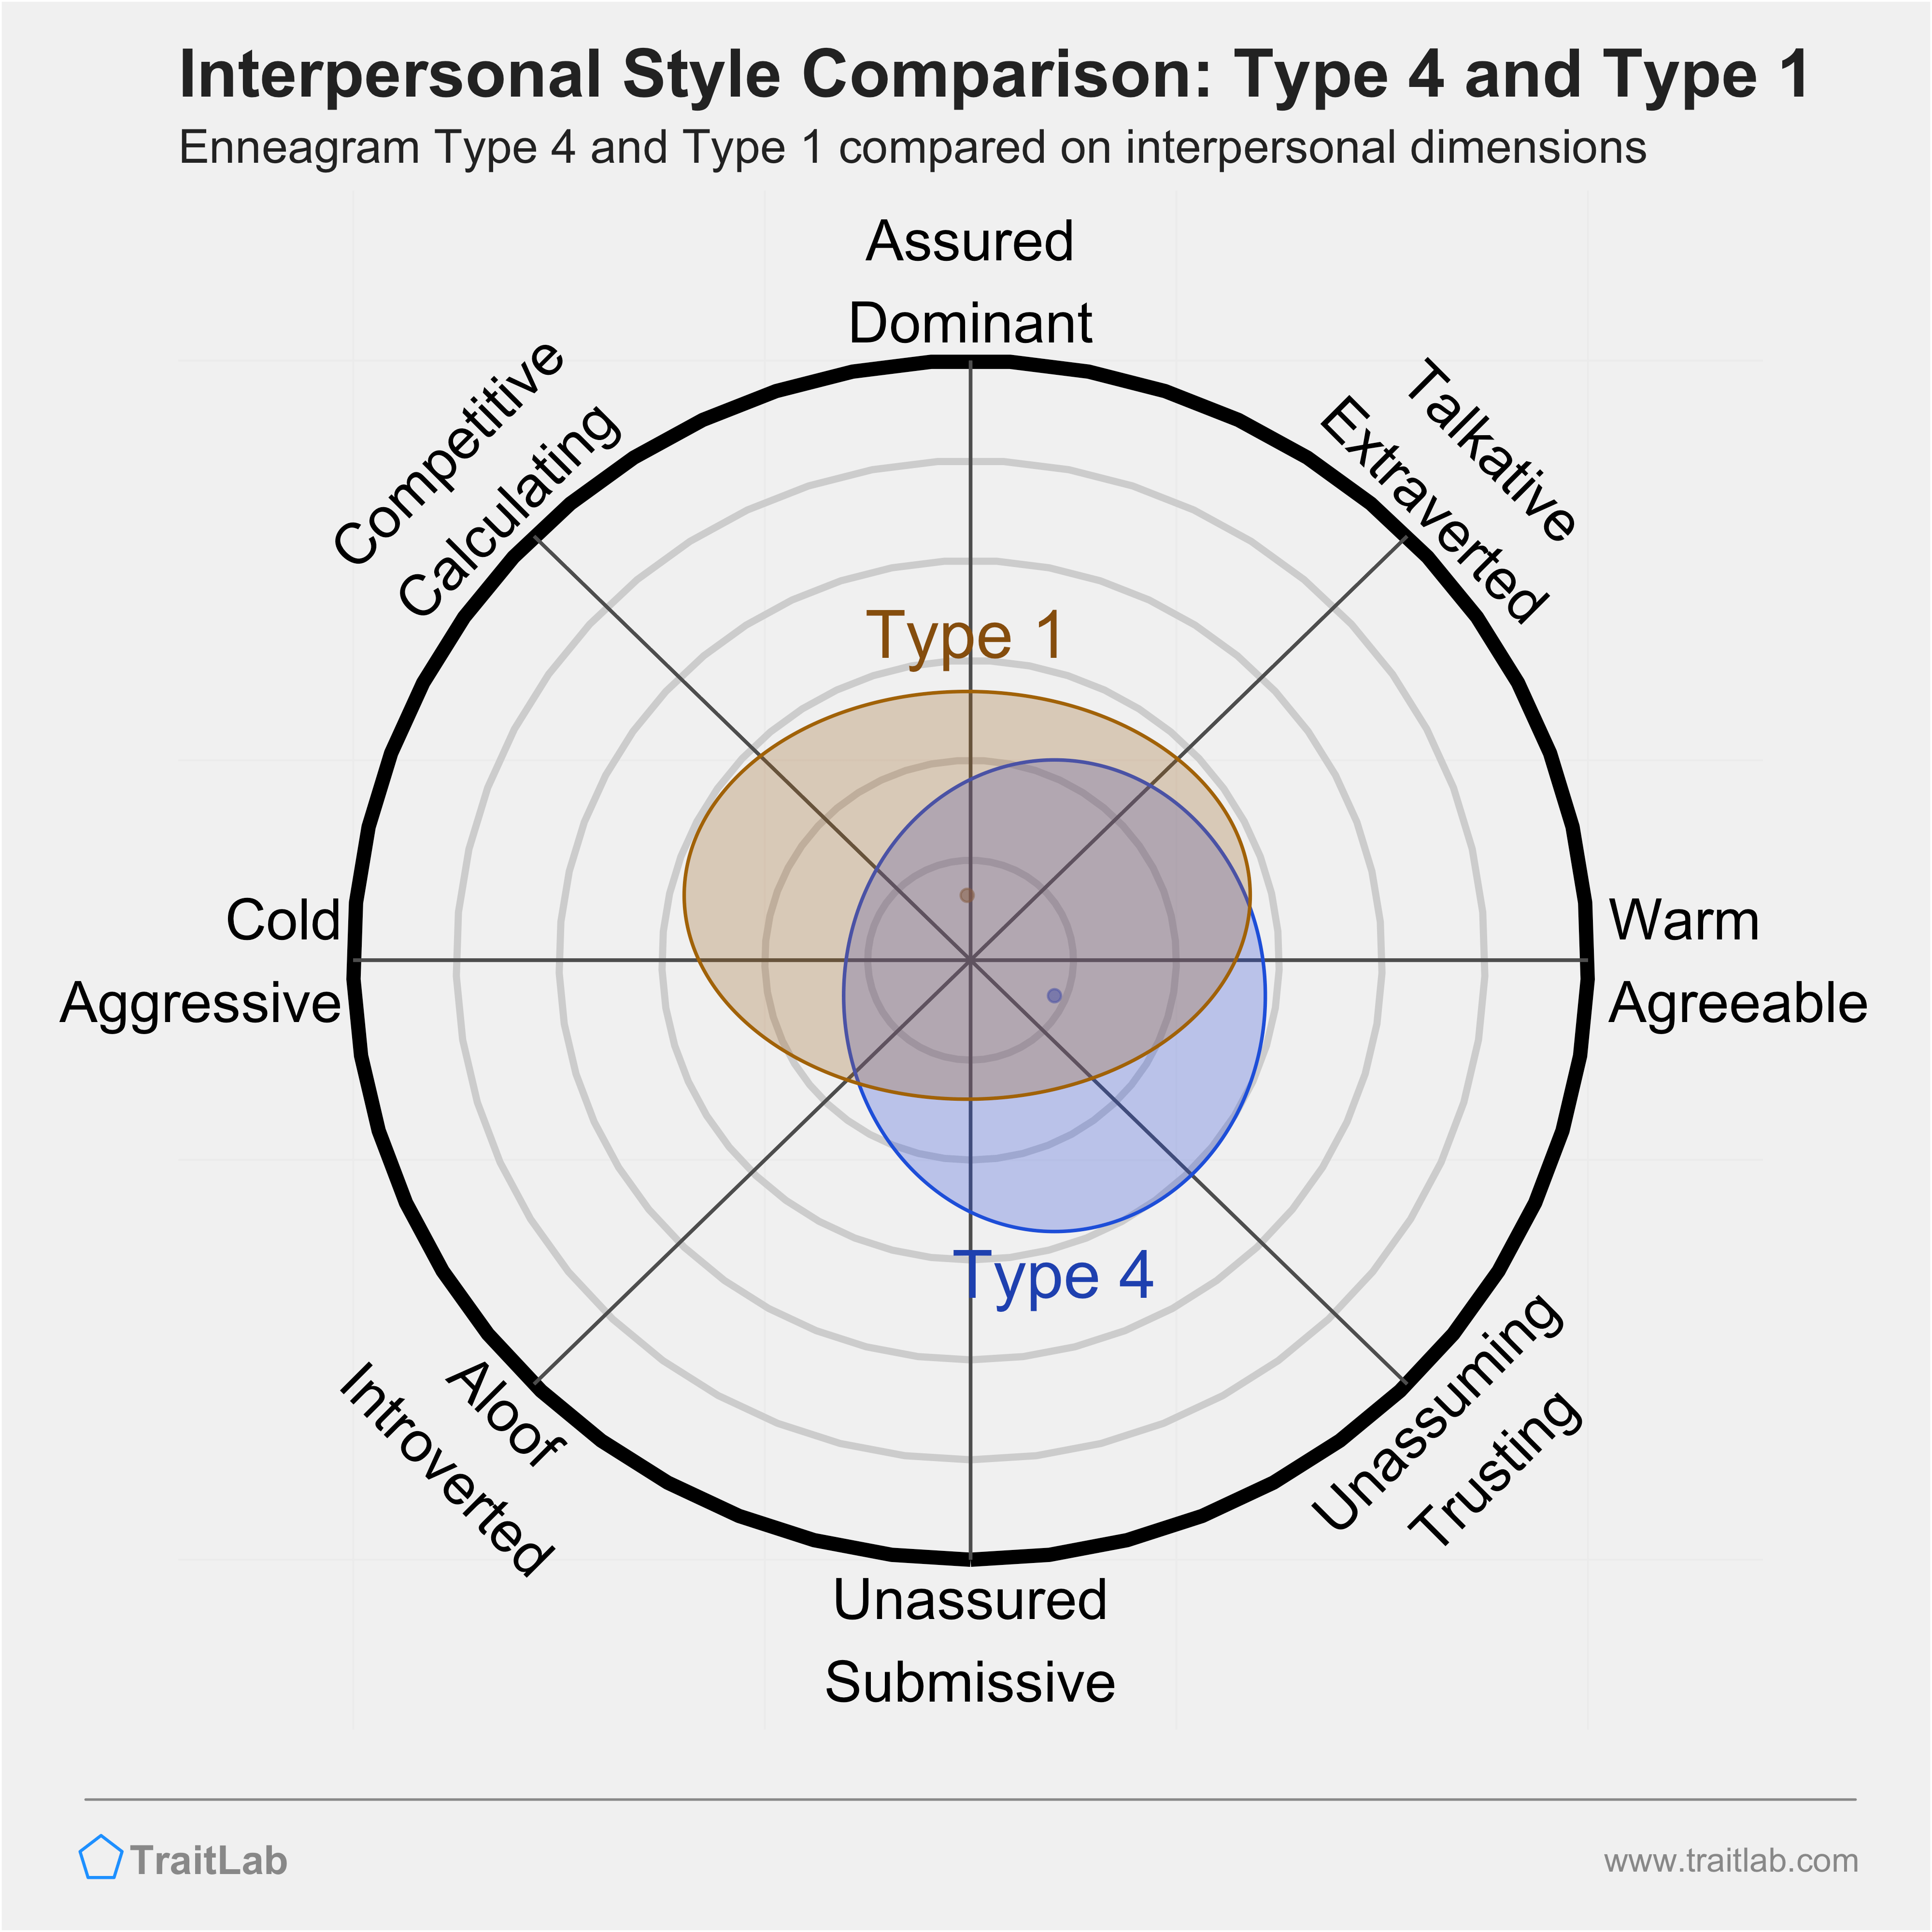 Enneagram Type 4 and Type 1 comparison across interpersonal dimensions